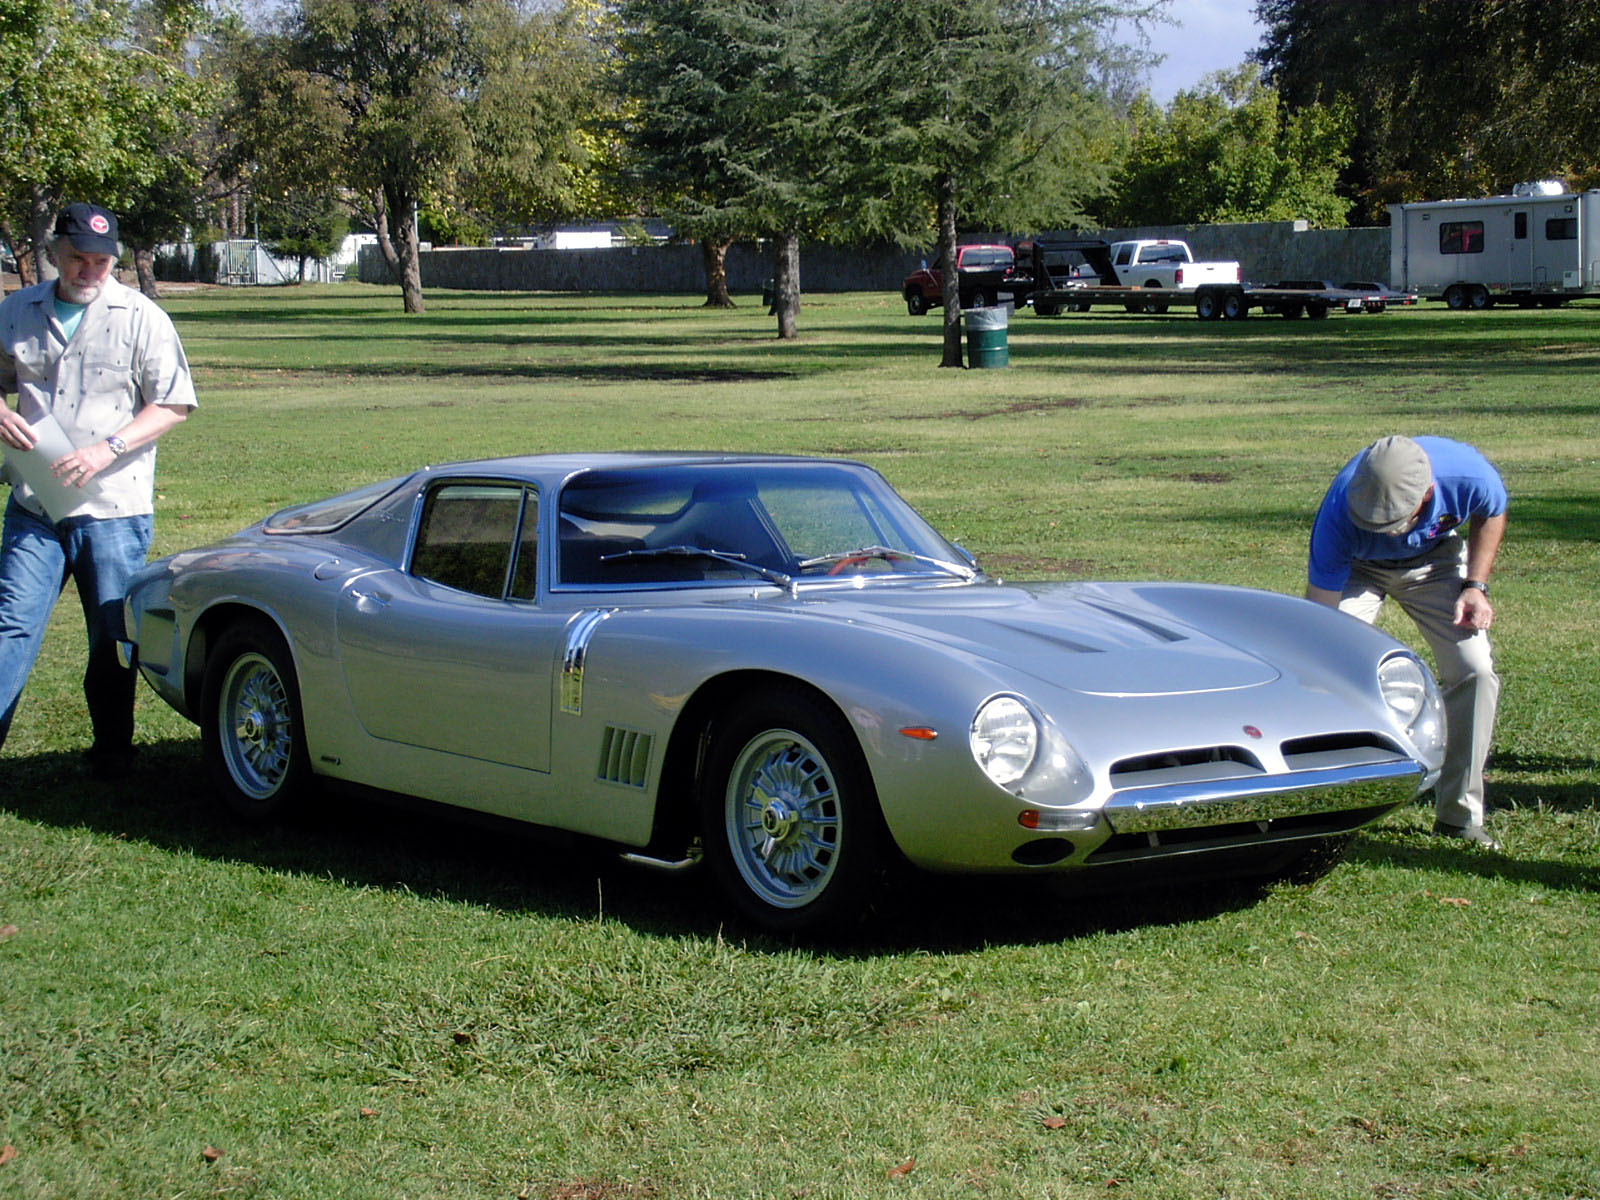 My First Event With The Bizzarrini - 2008